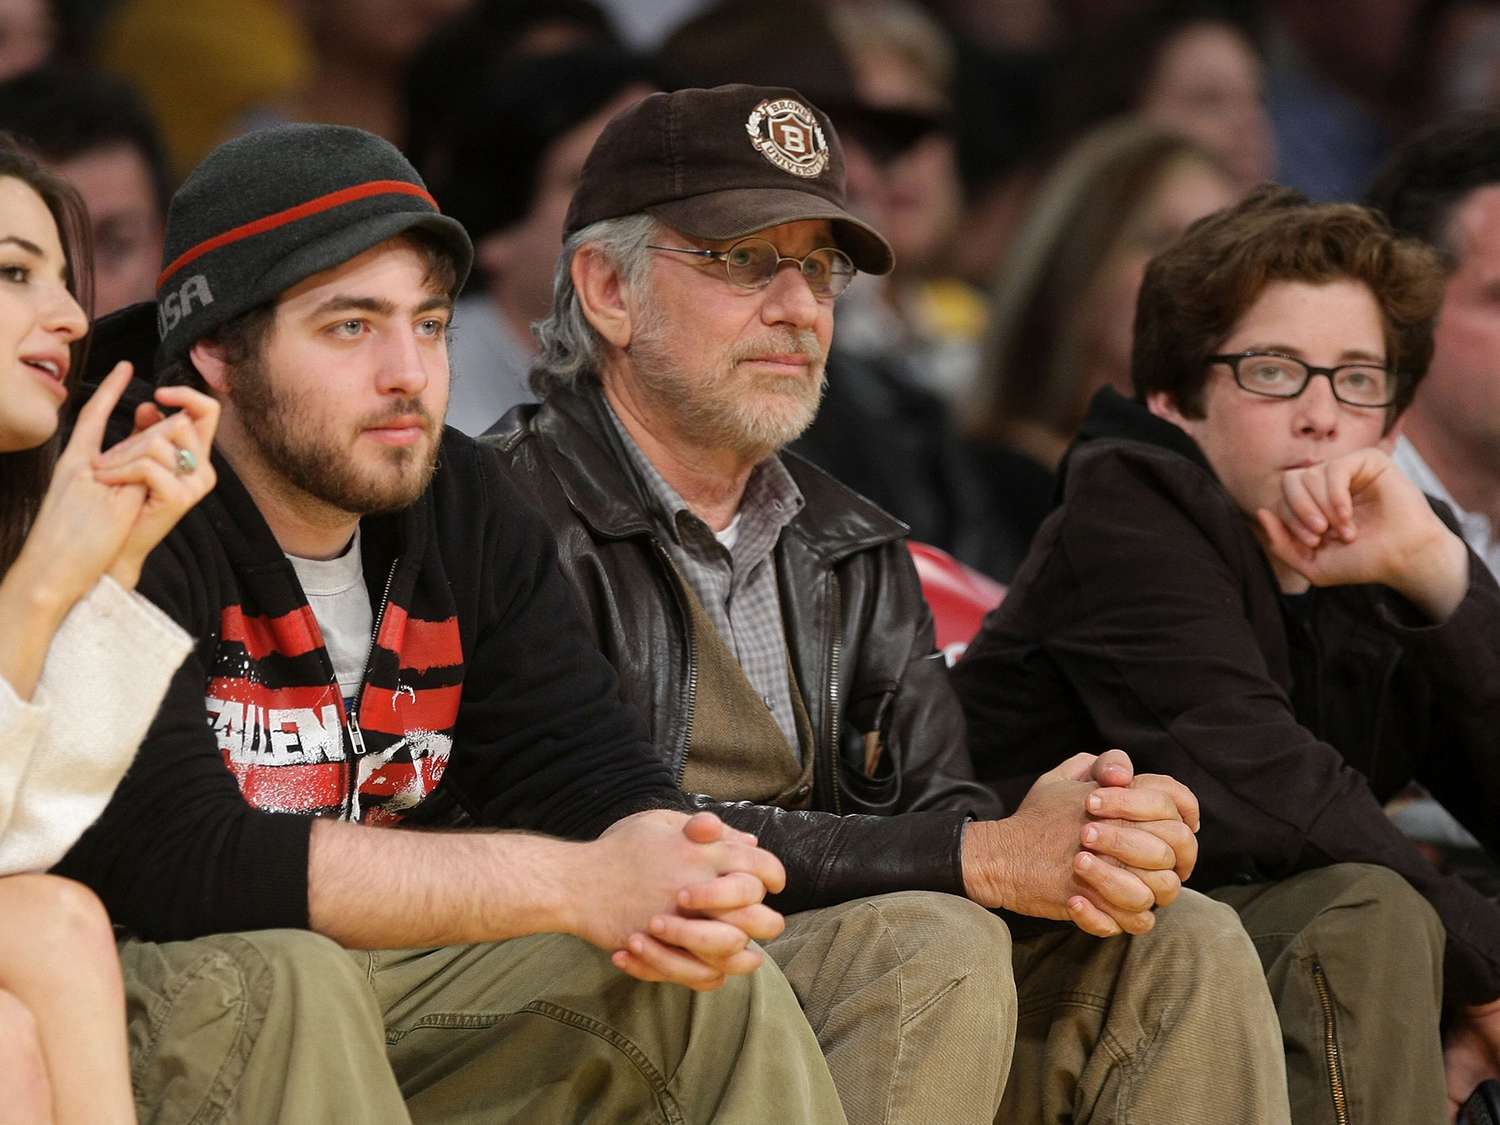 Steven Spielberg (center) and his sons Sawyer (R), and Max (L) attend the Los Angeles Lakers vs Portland Trailblazers game at the Staples Center on April 2, 2008 in Los Angeles, California